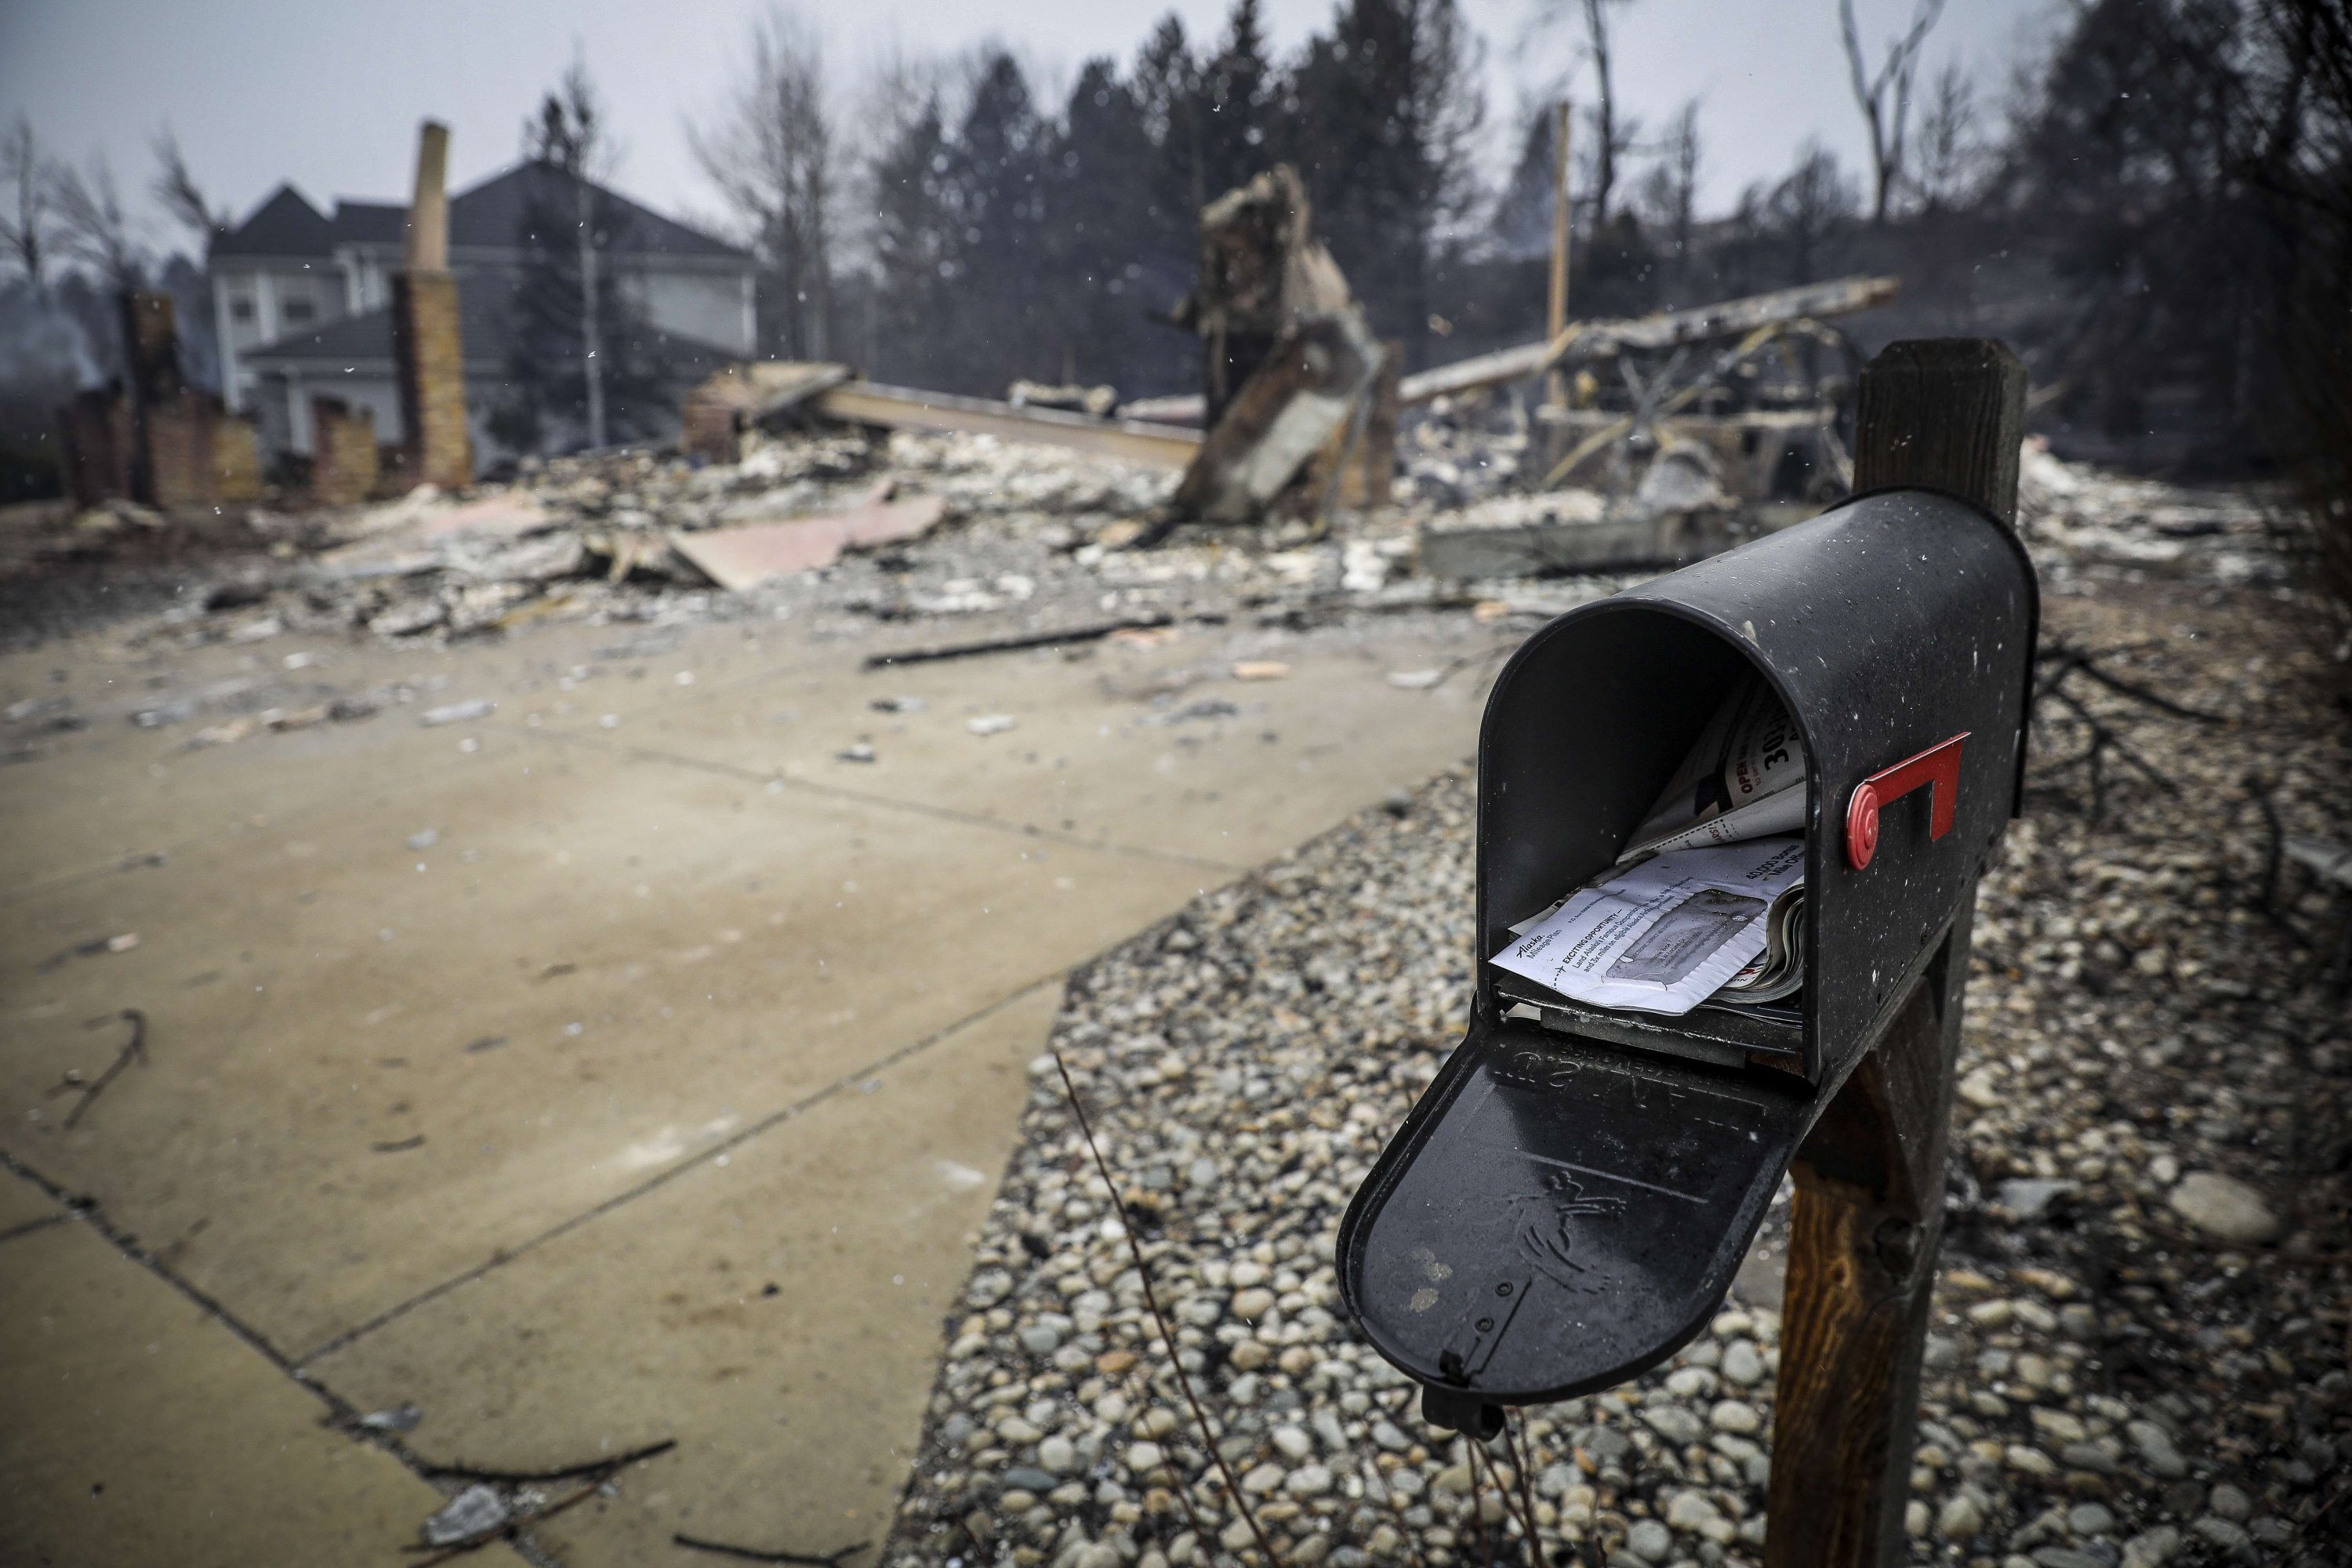 Uncollected mail sits in a mailbox in front of the remains of a home in the aftermath of the Marshall Fire in Louisville, Colorado, Dec. 31, 2021. (Getty Images/AFP Photo)